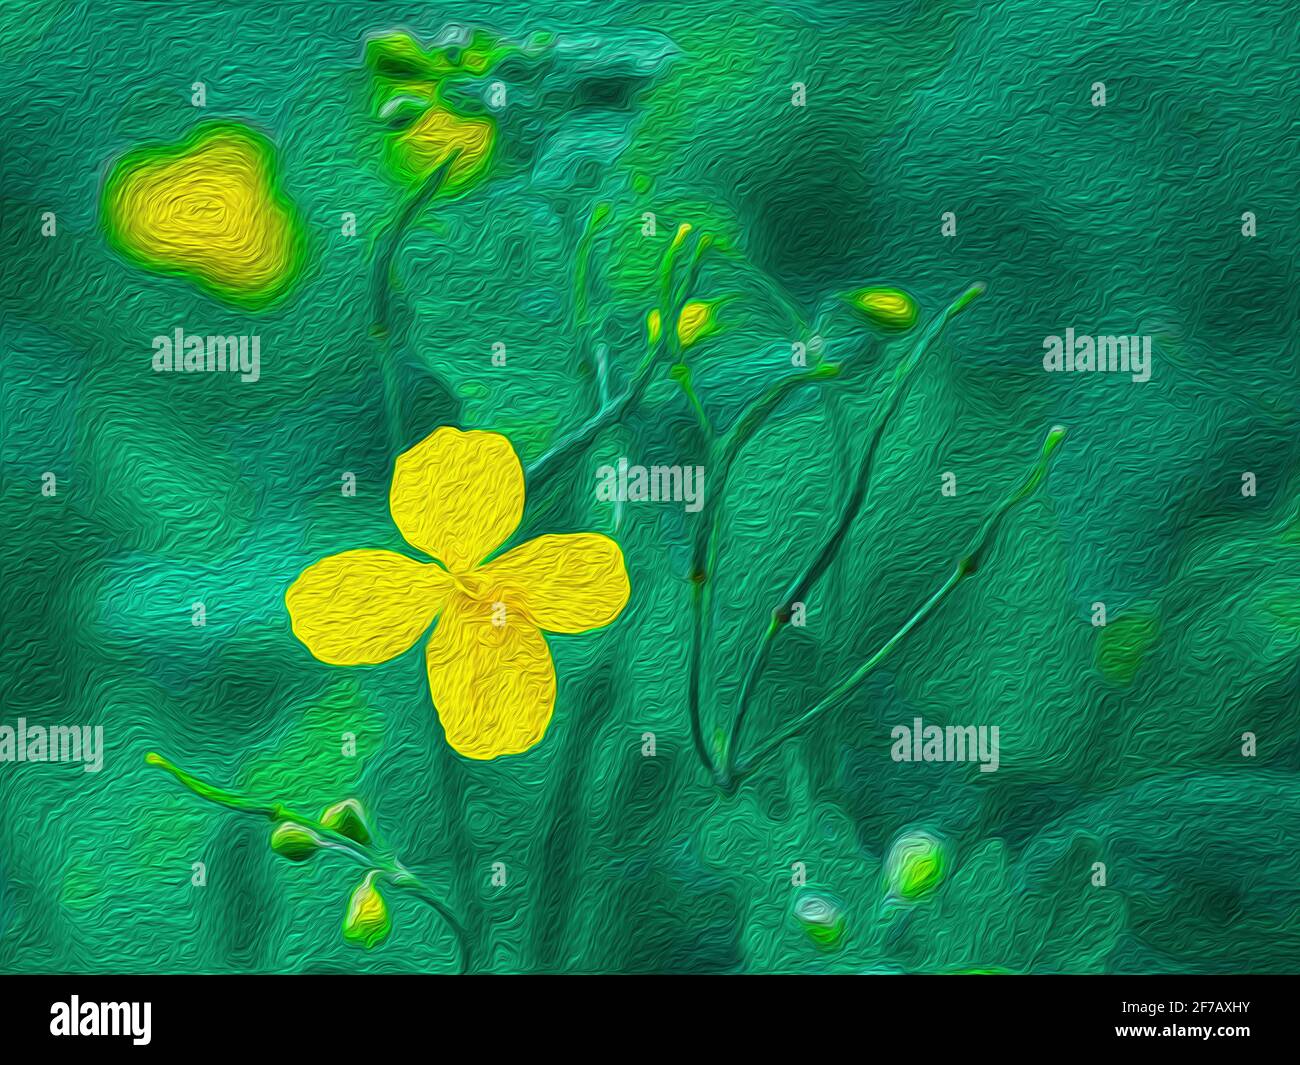 Yellow flower of celandine plant on a green background, raster illustration. Flowering Period: Spring-Autumn Stock Photo